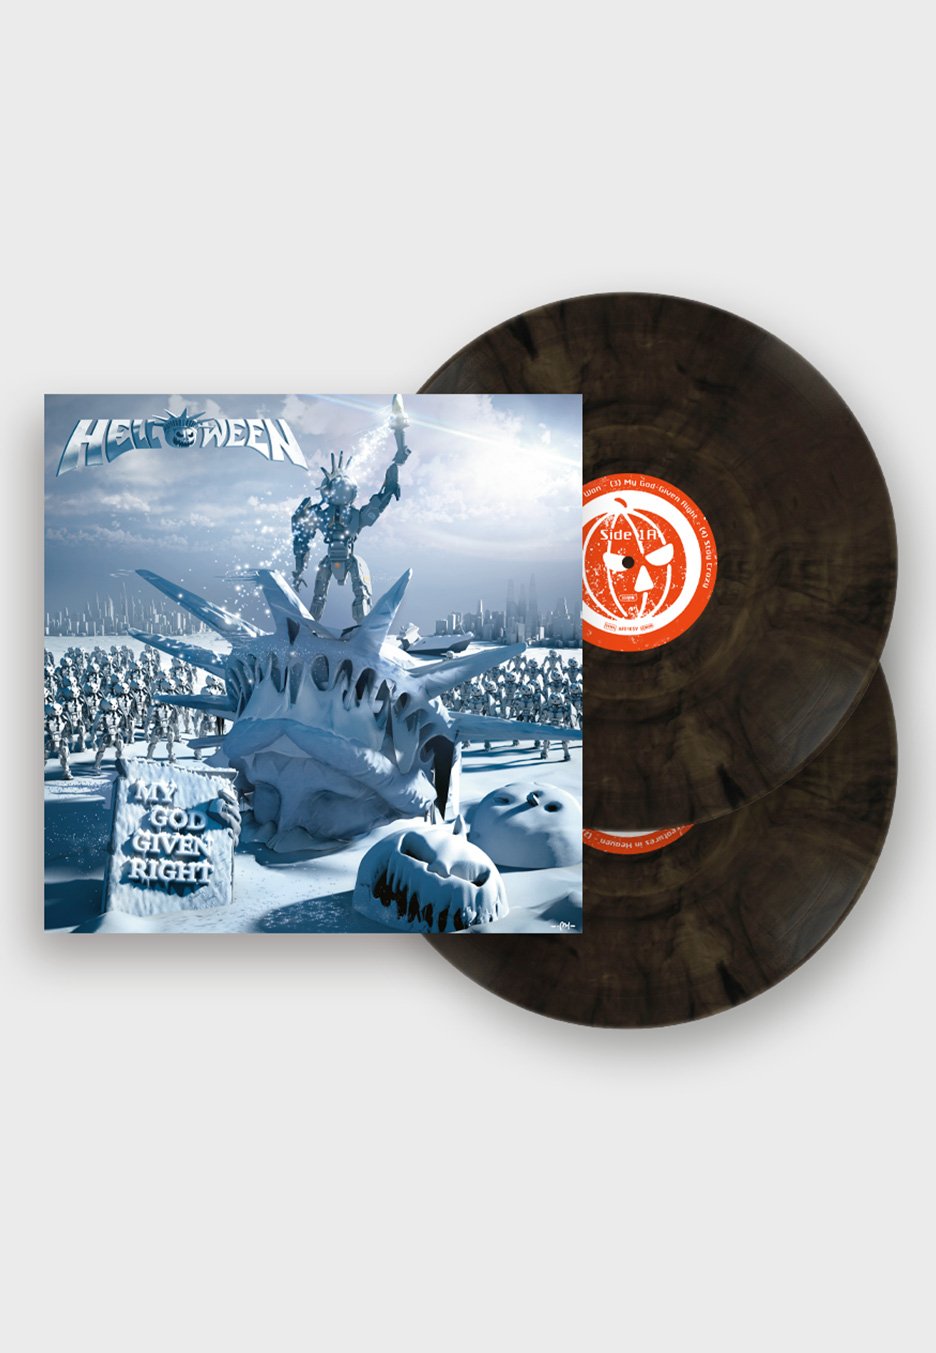 Helloween - My God-Given Right Ltd. Clear/Black - Marbled 2 Vinyl